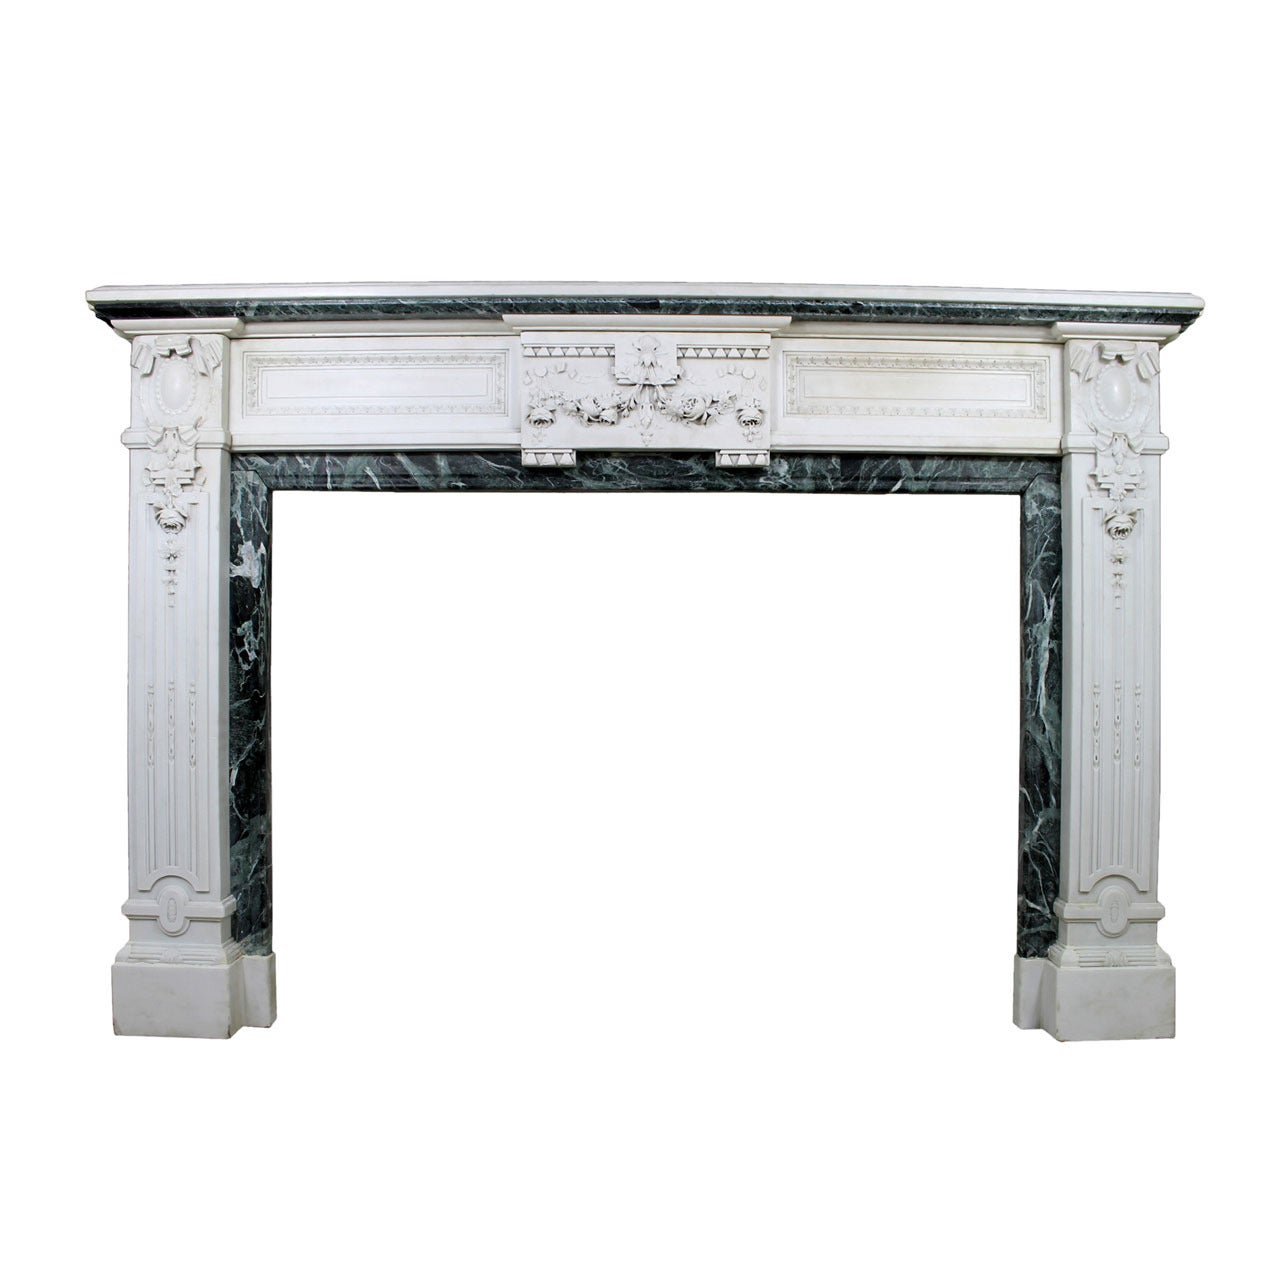 Antique Adam Style Fireplace Chimneypiece in Statuary Carrara Marble from the 19th Century For Sale